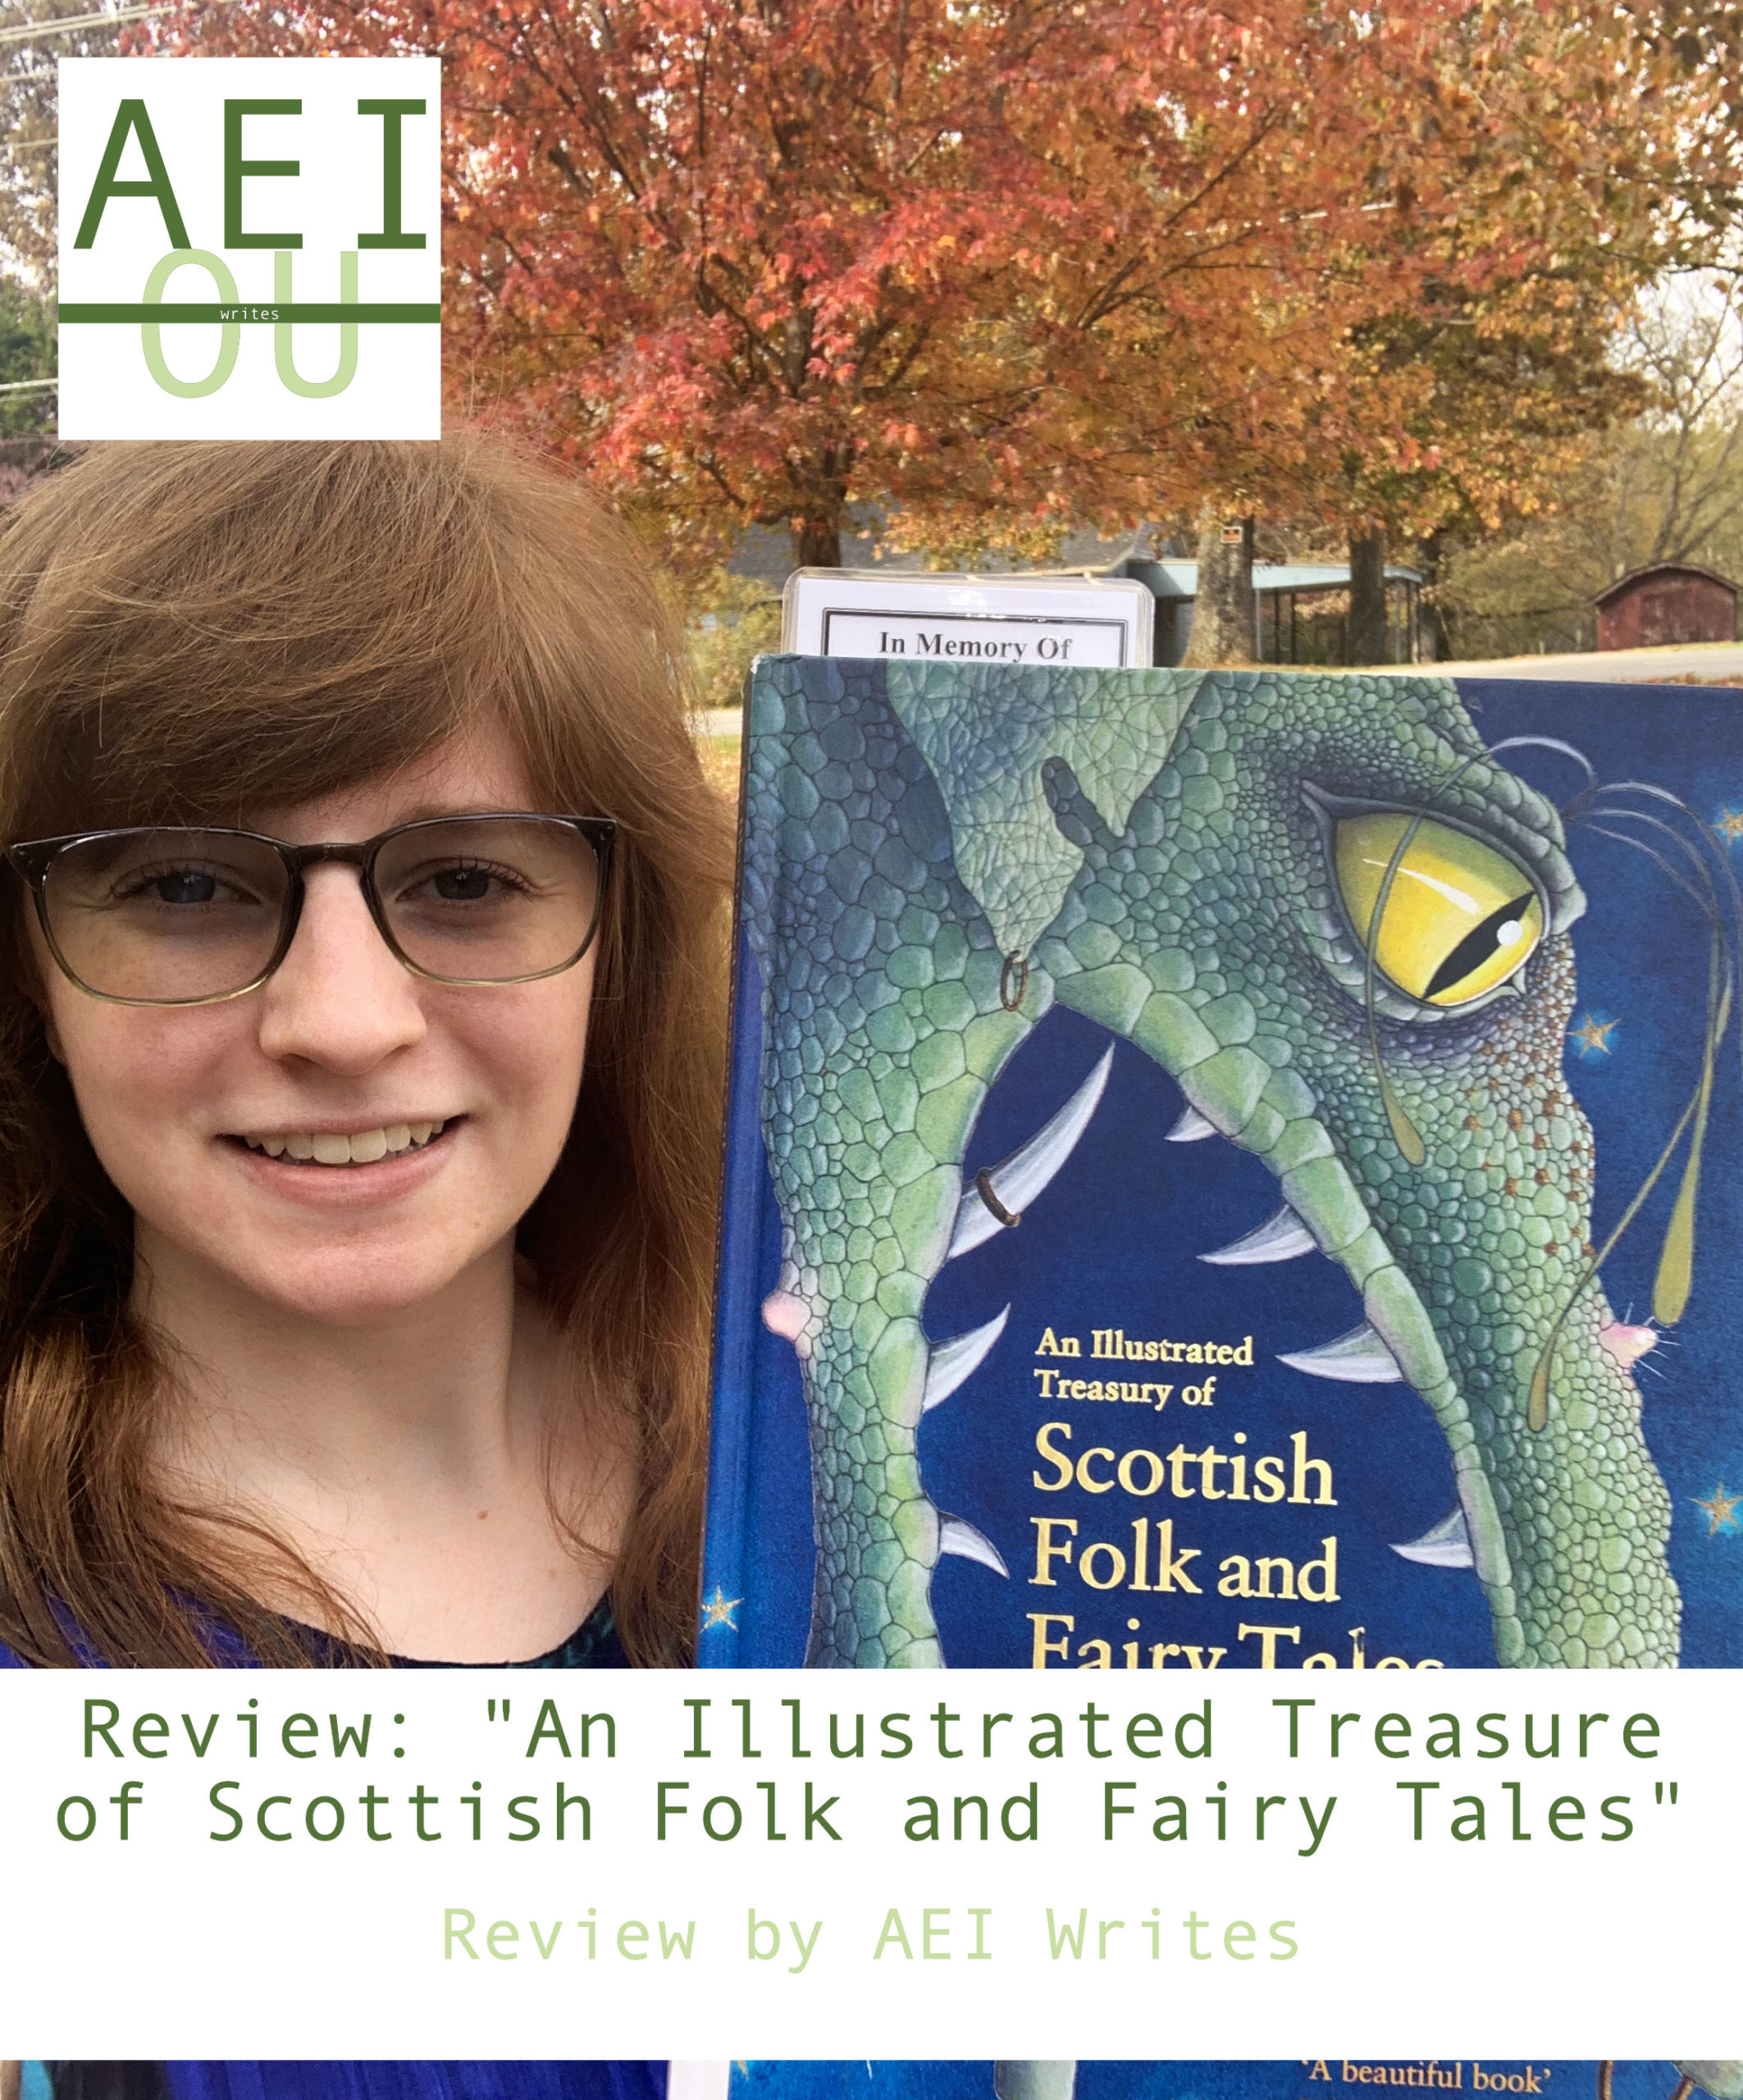 Review: “An Illustrated Treasury of Scottish Folk and Fairy Tales”